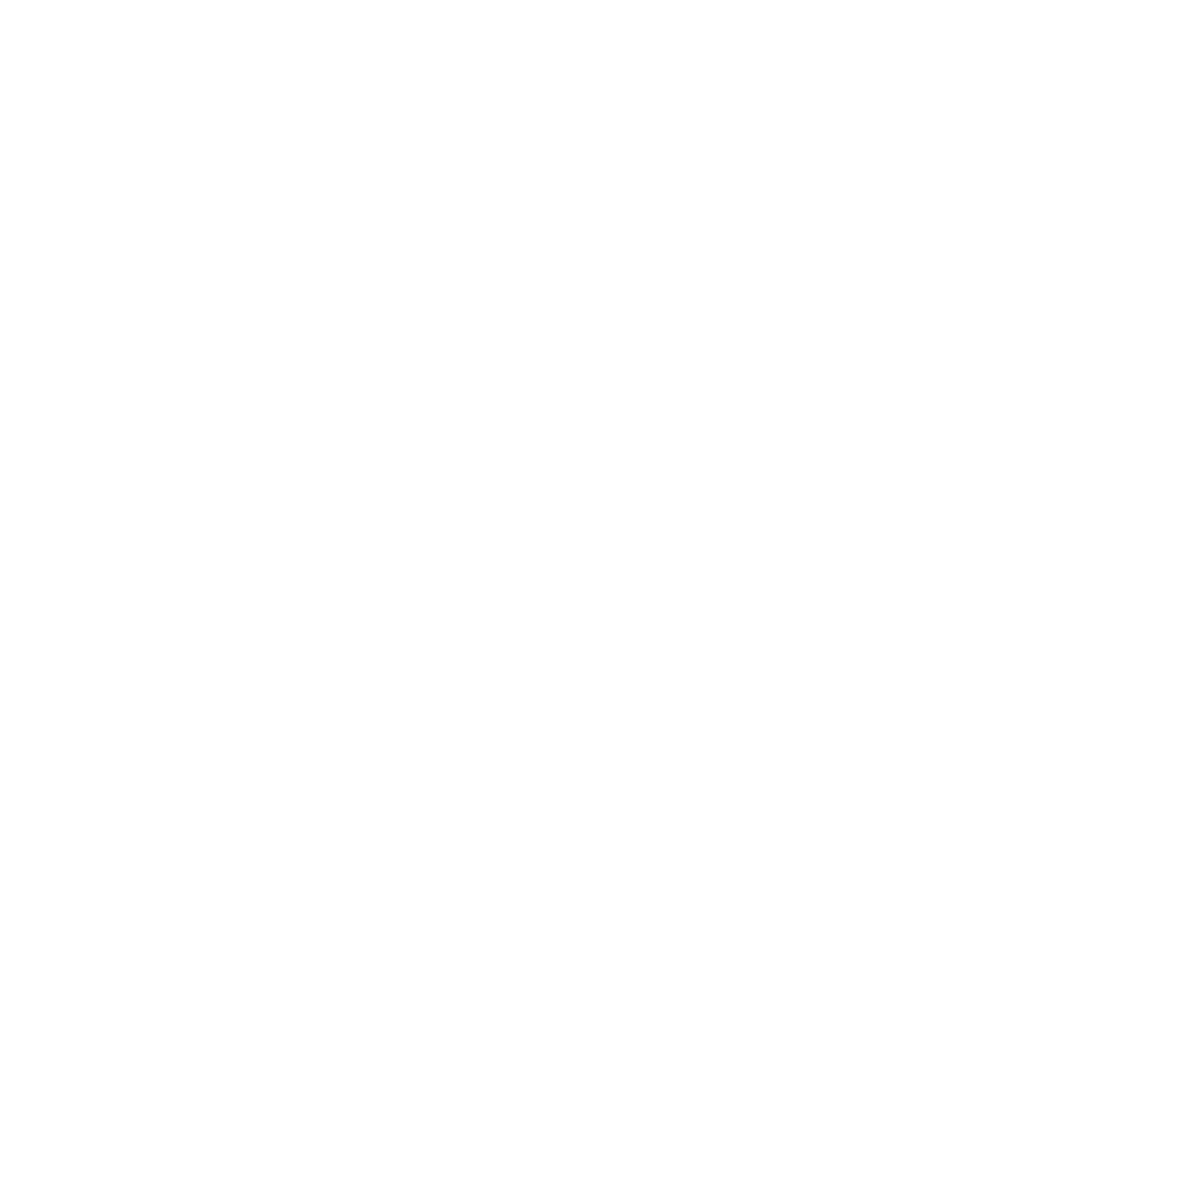 James Trial Law Firm